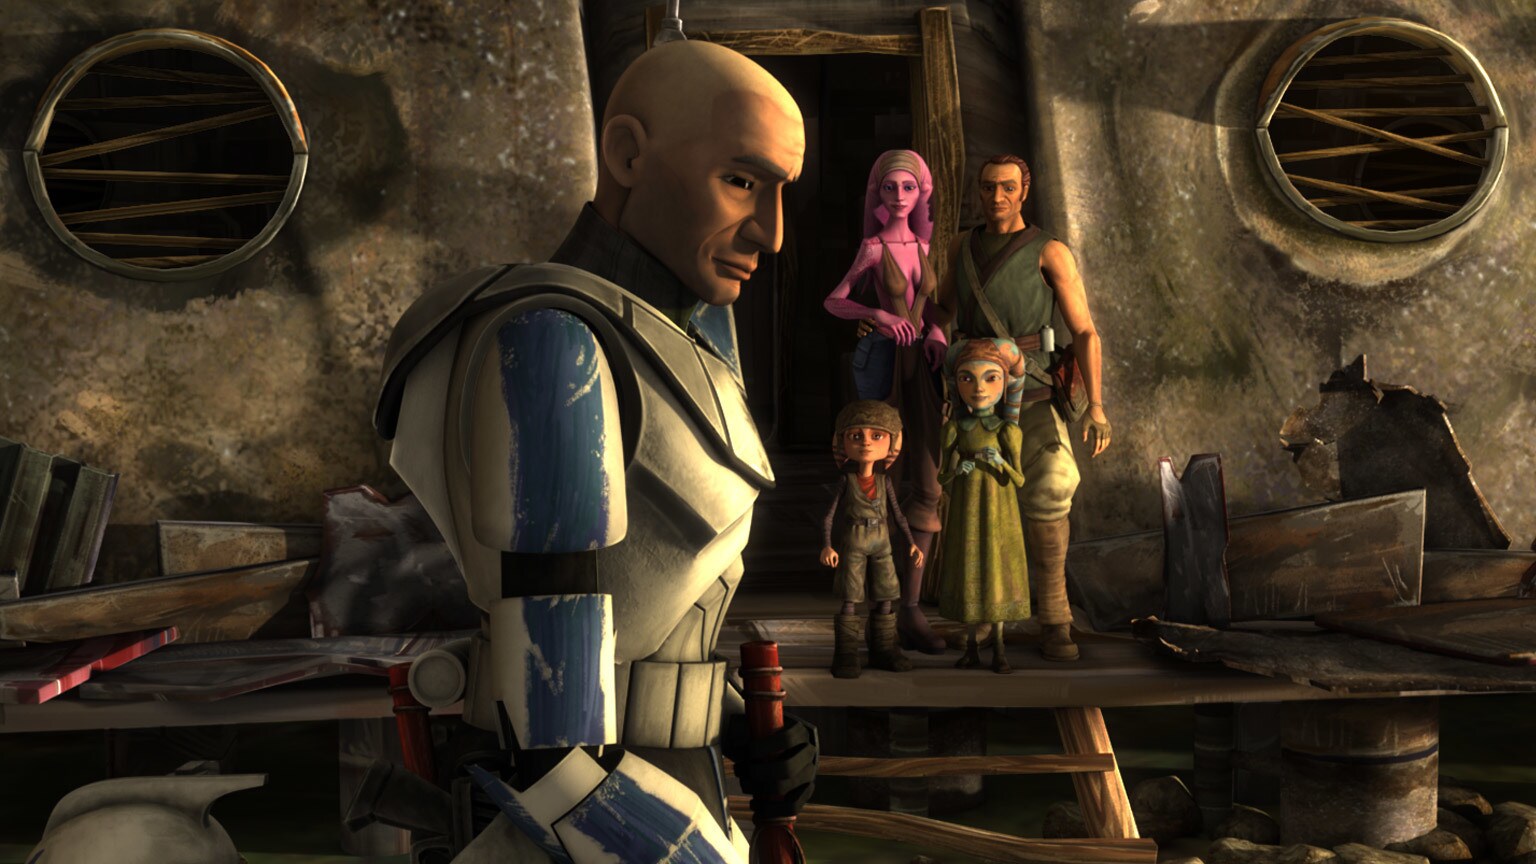 The Clone Wars Rewatch: Captain Rex and "The Deserter"